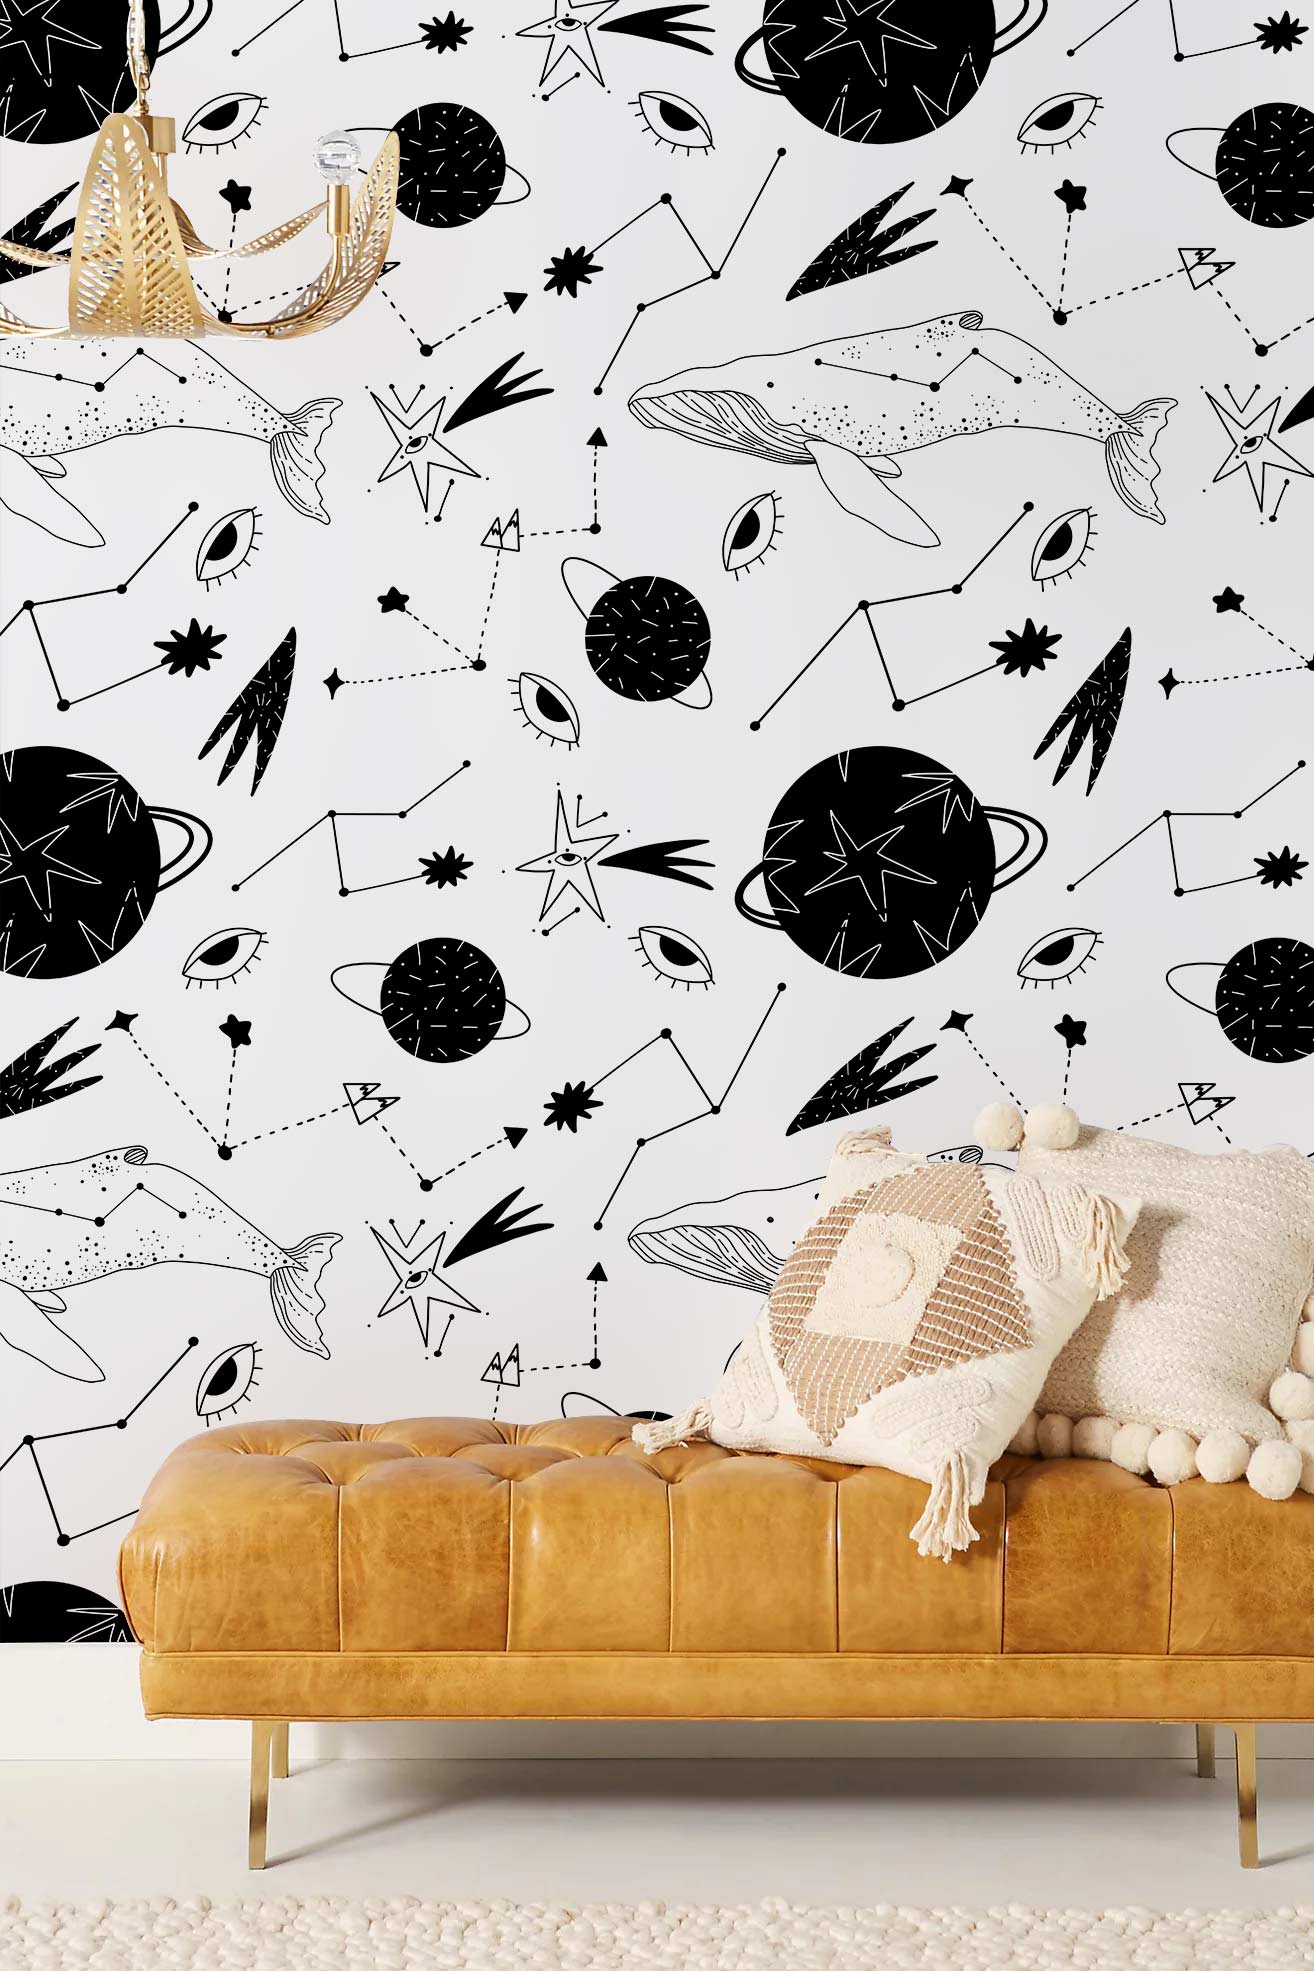 Whale and planets Animal Mural Wallpaper for living Room